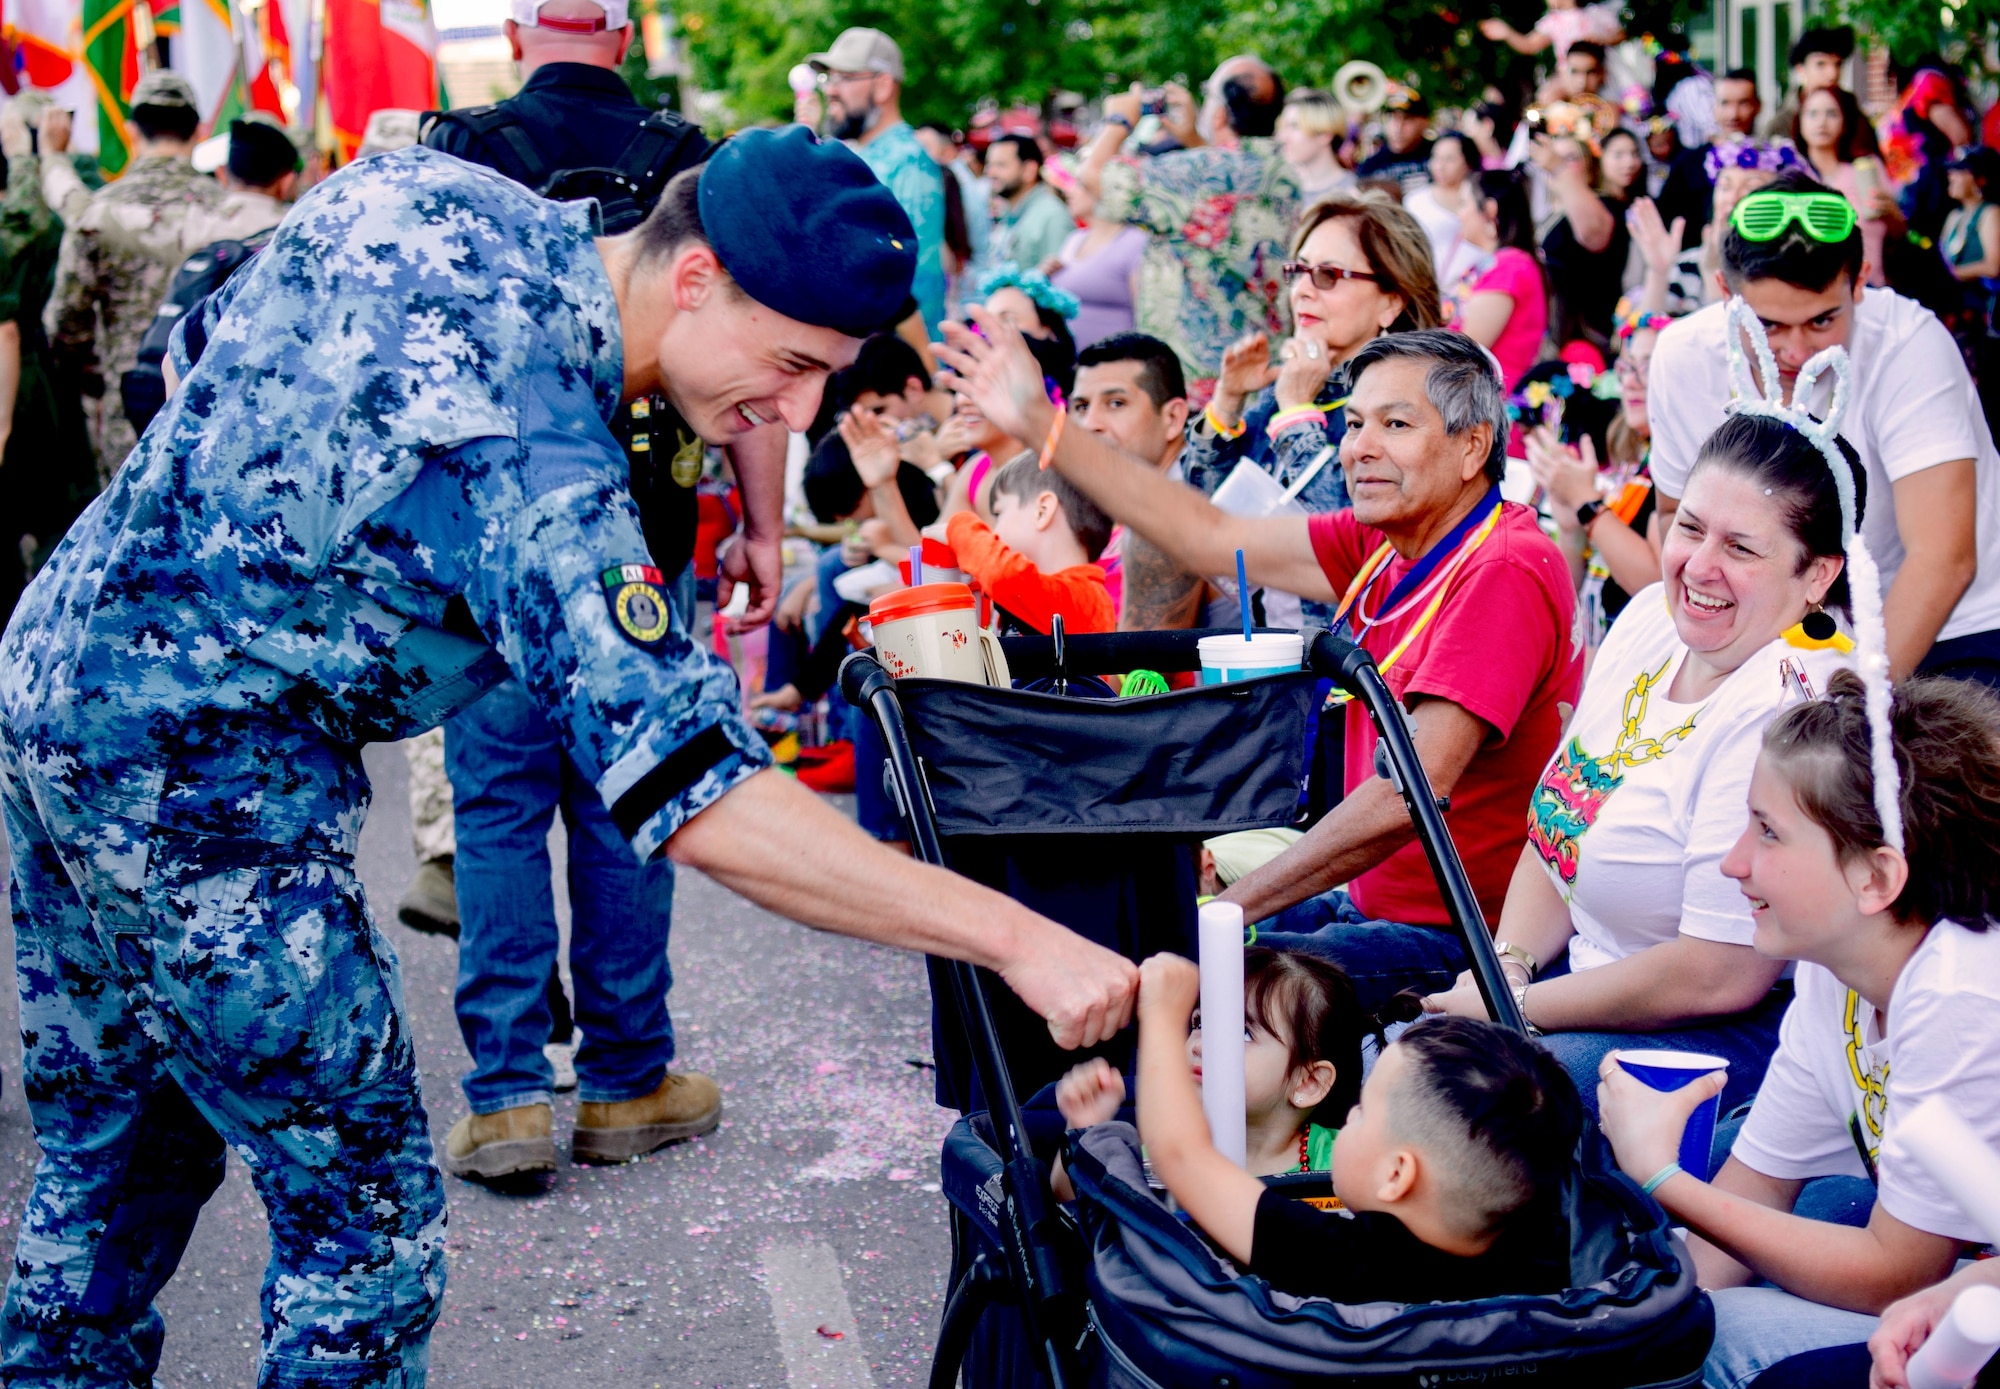 Navy diver and Italian Defense Language Institute English Language Center student, Pietro Stipa, interacts with parade goers at the annual Fiesta Flambeau parade in San Antonio.